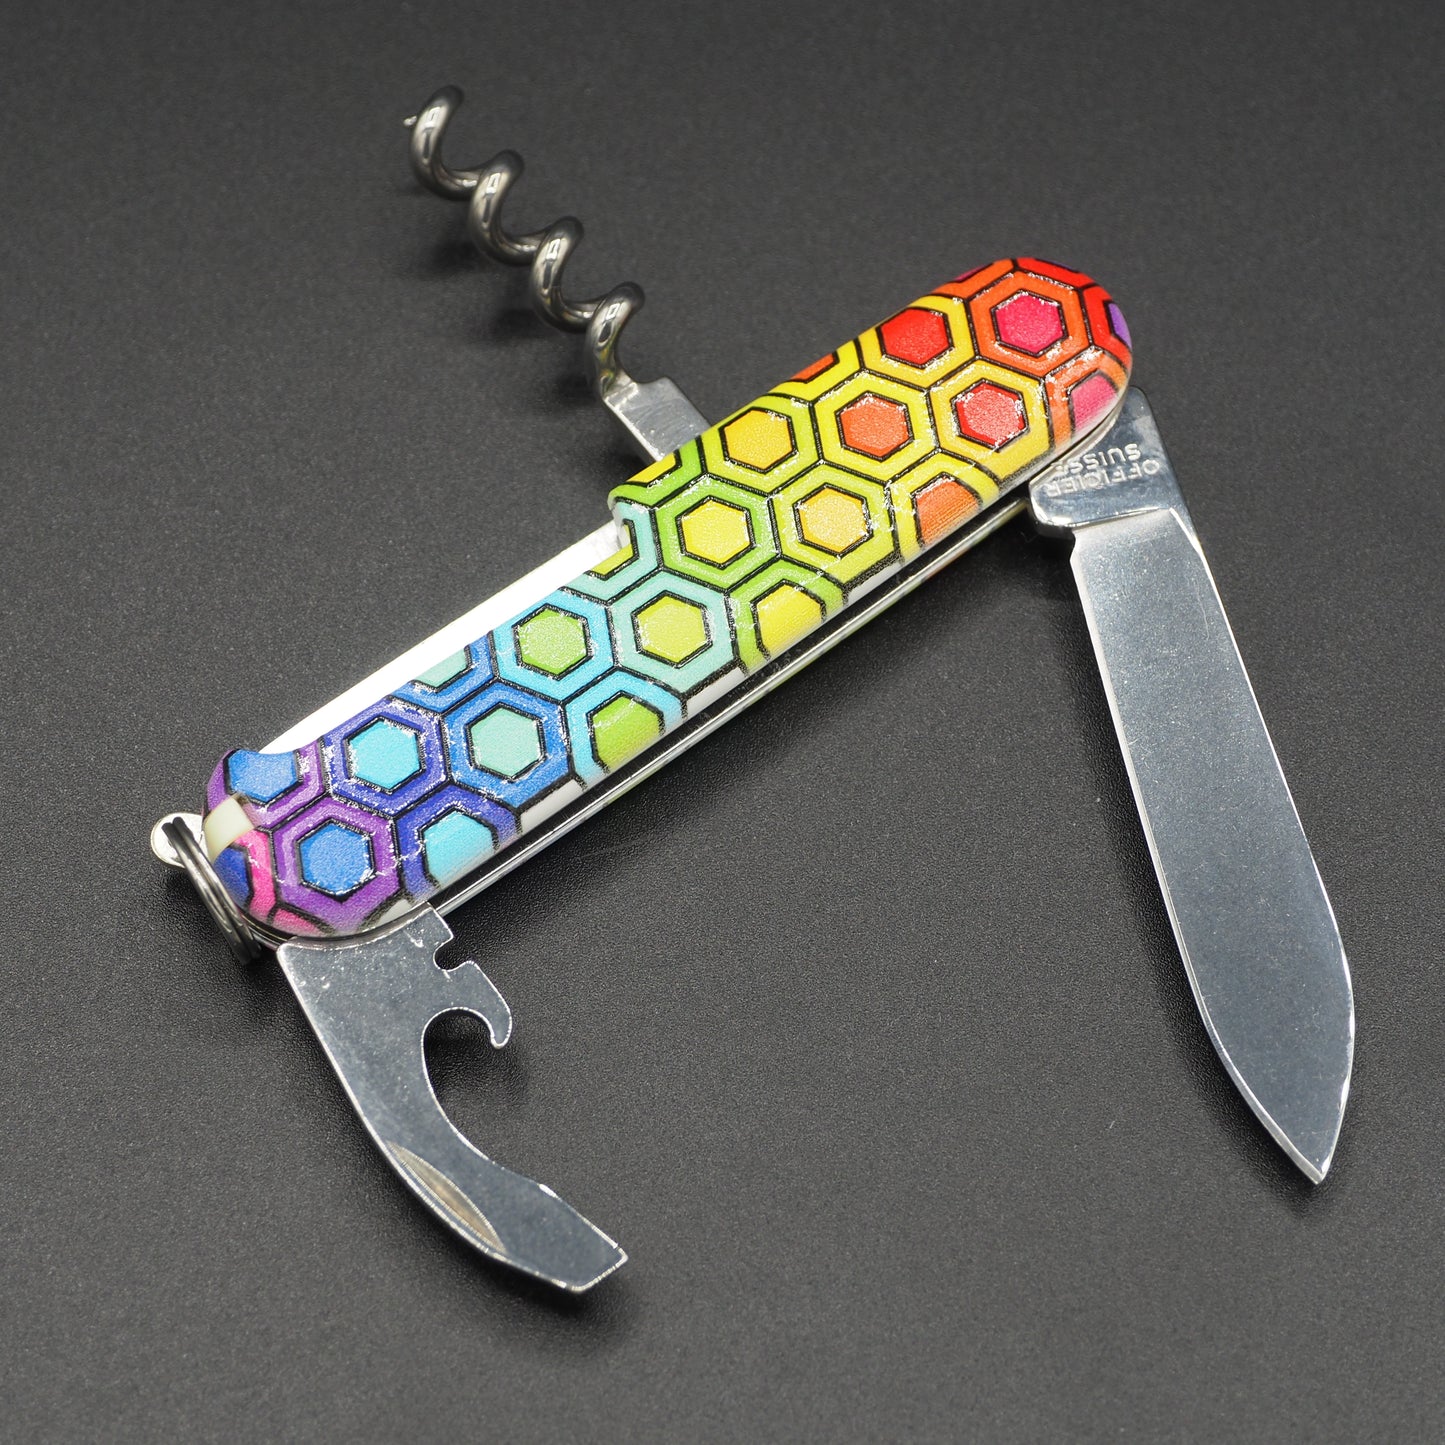 Victorinox Waiter 84mm "The Color 2" 3D The Sharp Knife Club Edition